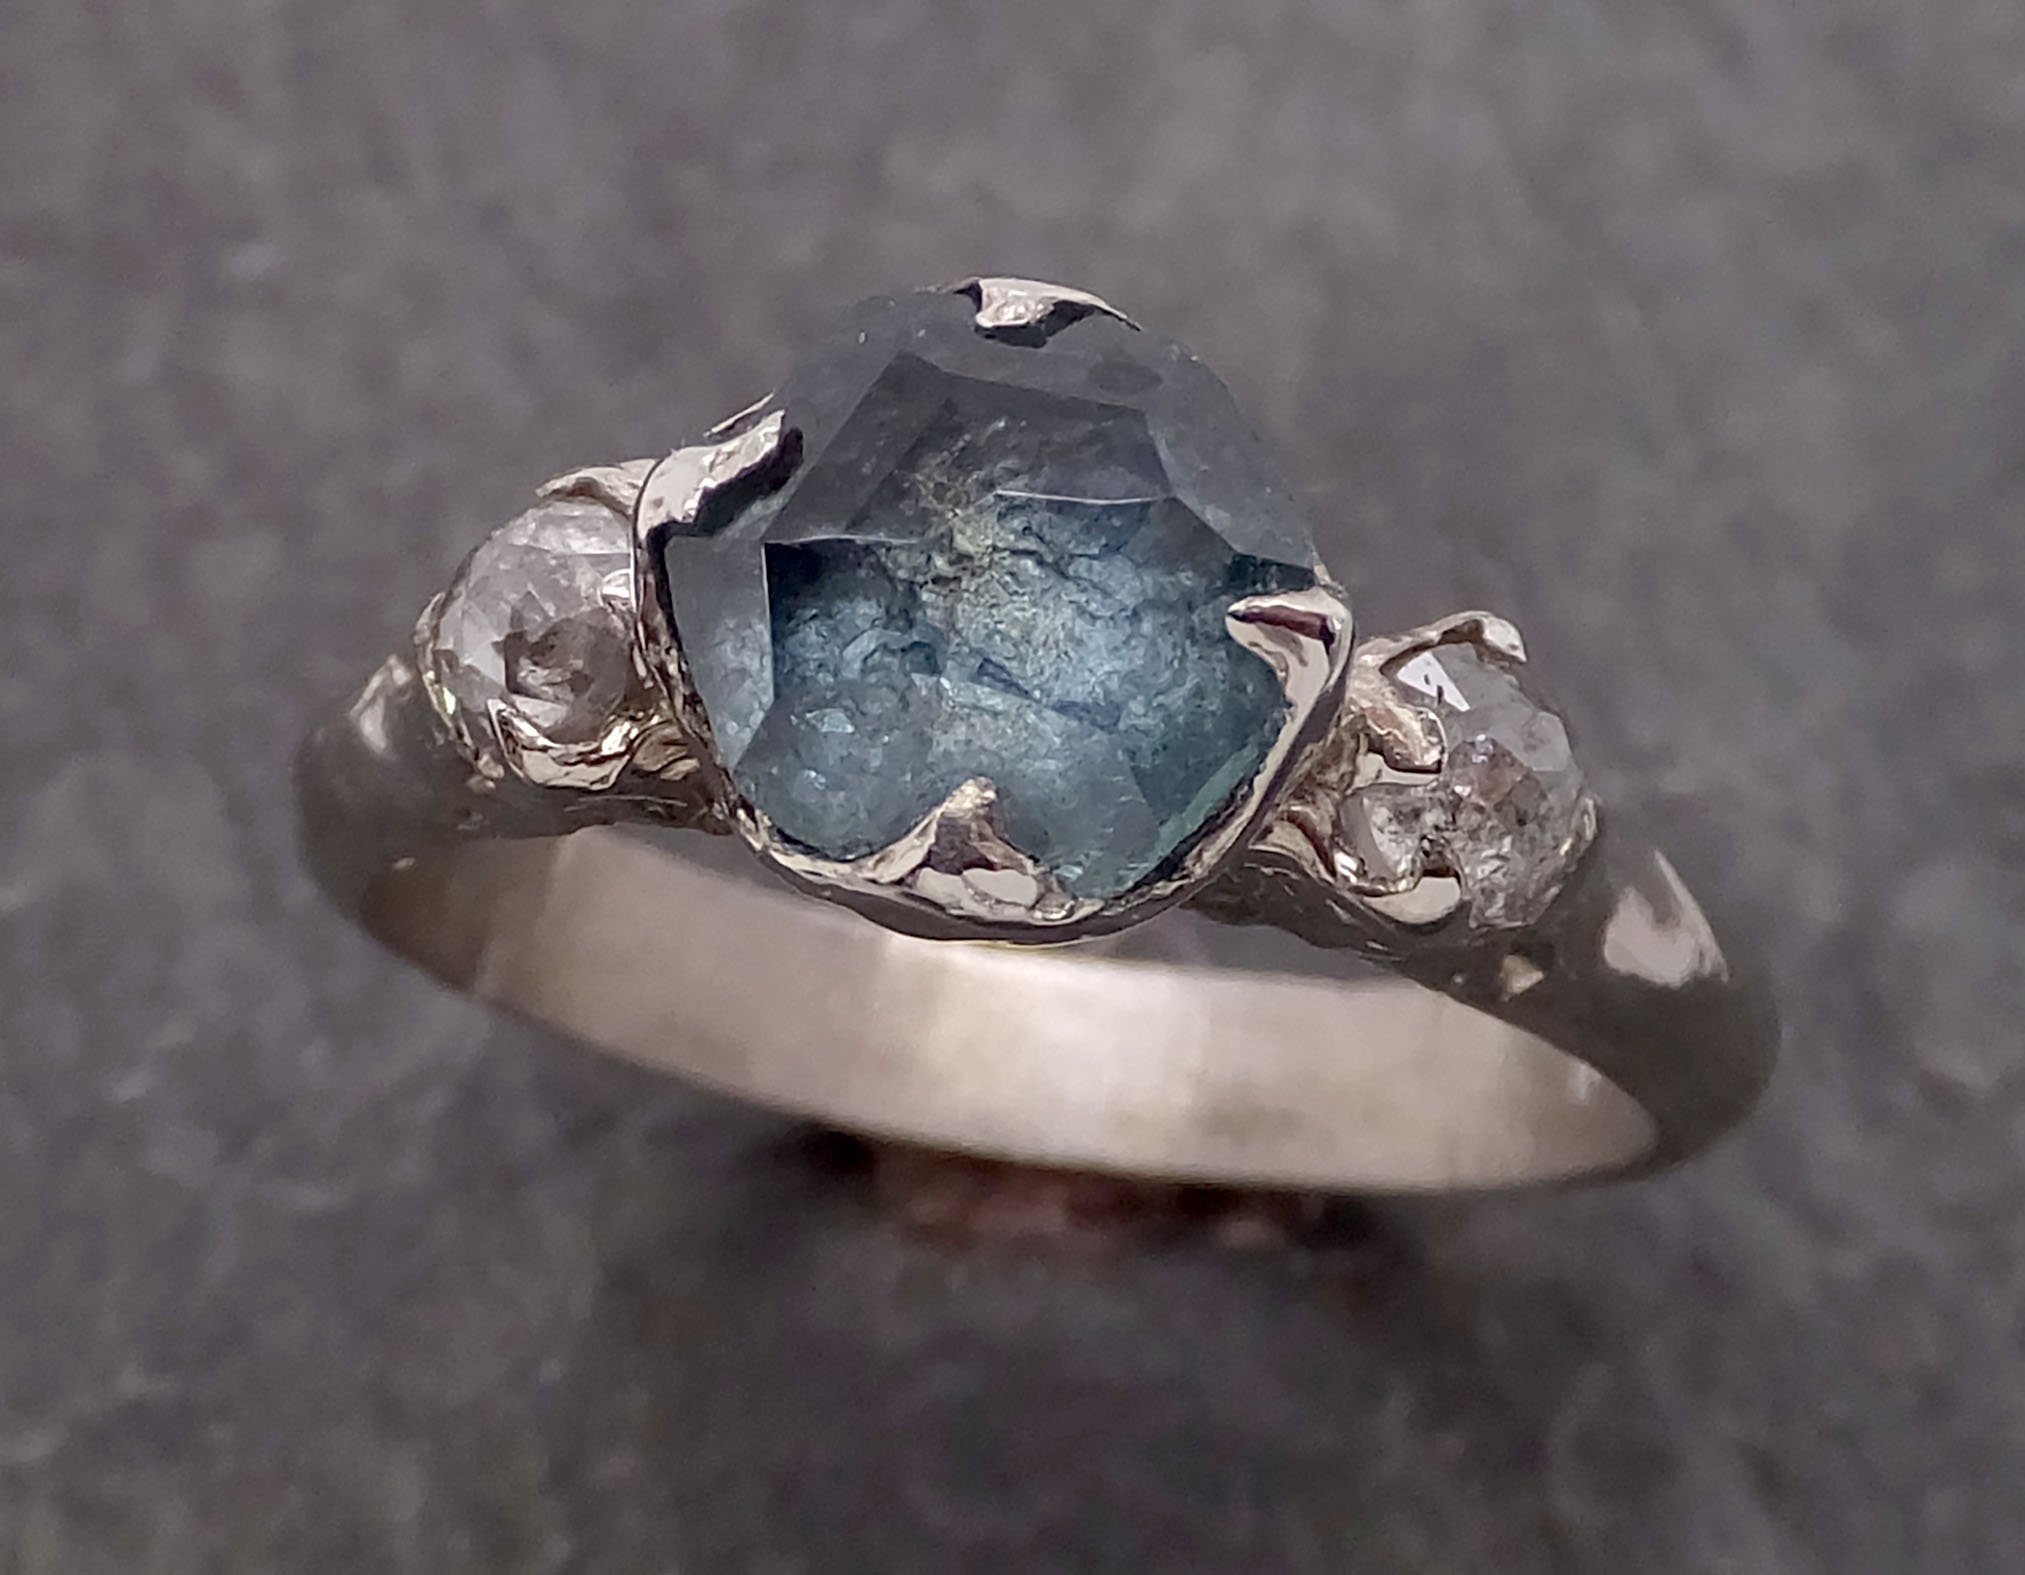 partially faceted blue montana sapphire and fancy diamonds 14k white gold engagement wedding ring custom gemstone ring multi stone ring c2112 Alternative Engagement